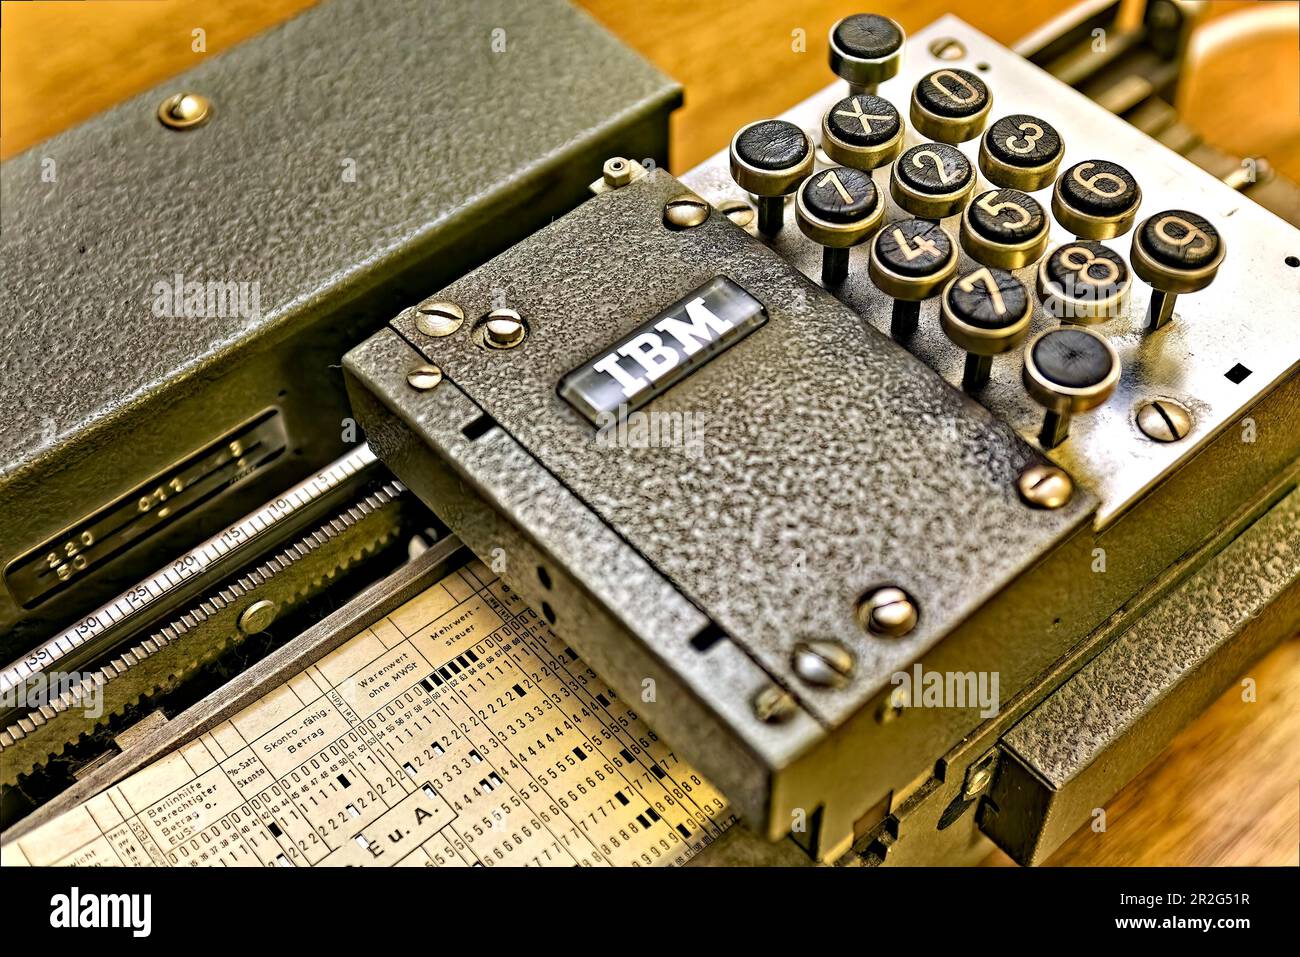 IBM: The historic Hollerith punch was used to record data on punched cards. Punch cards were an important tool for data entry and data processing Stock Photo